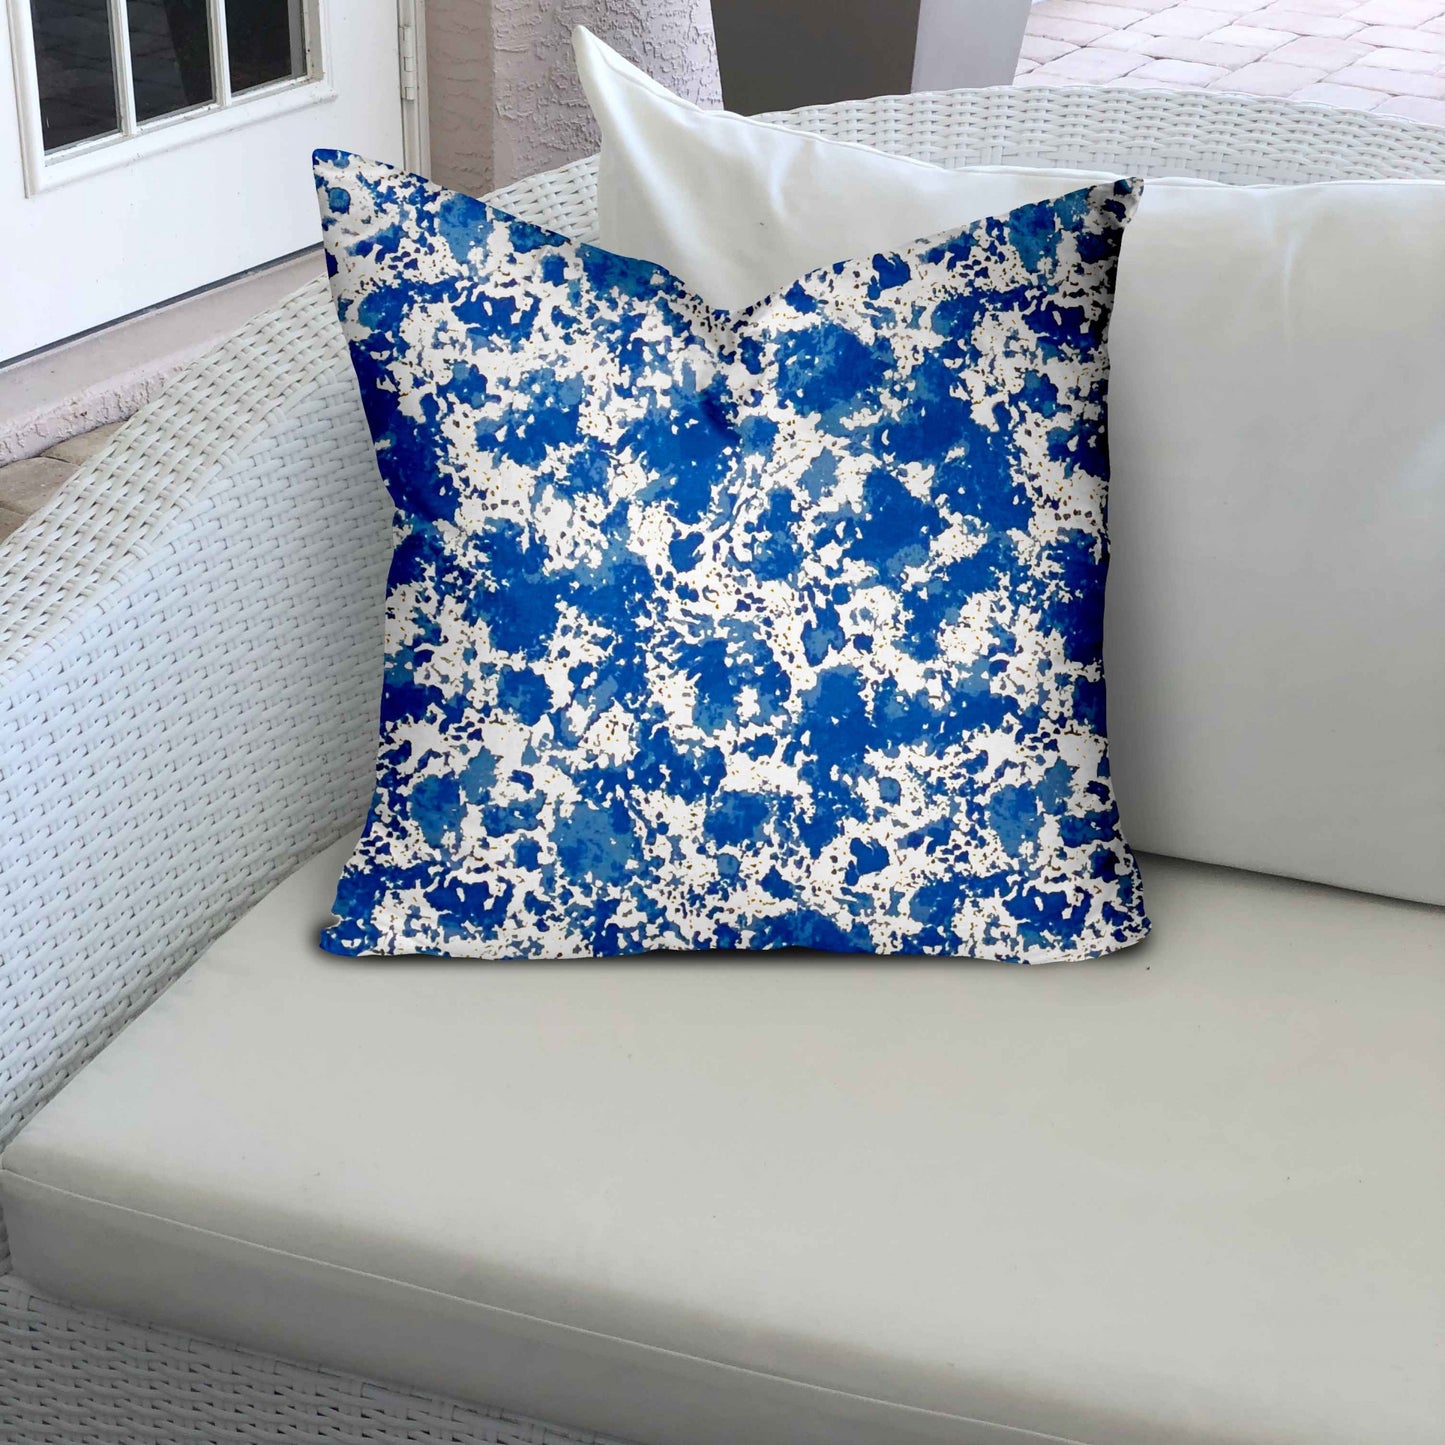 14" X 14" Blue And White Enveloped Coastal Throw Indoor Outdoor Pillow